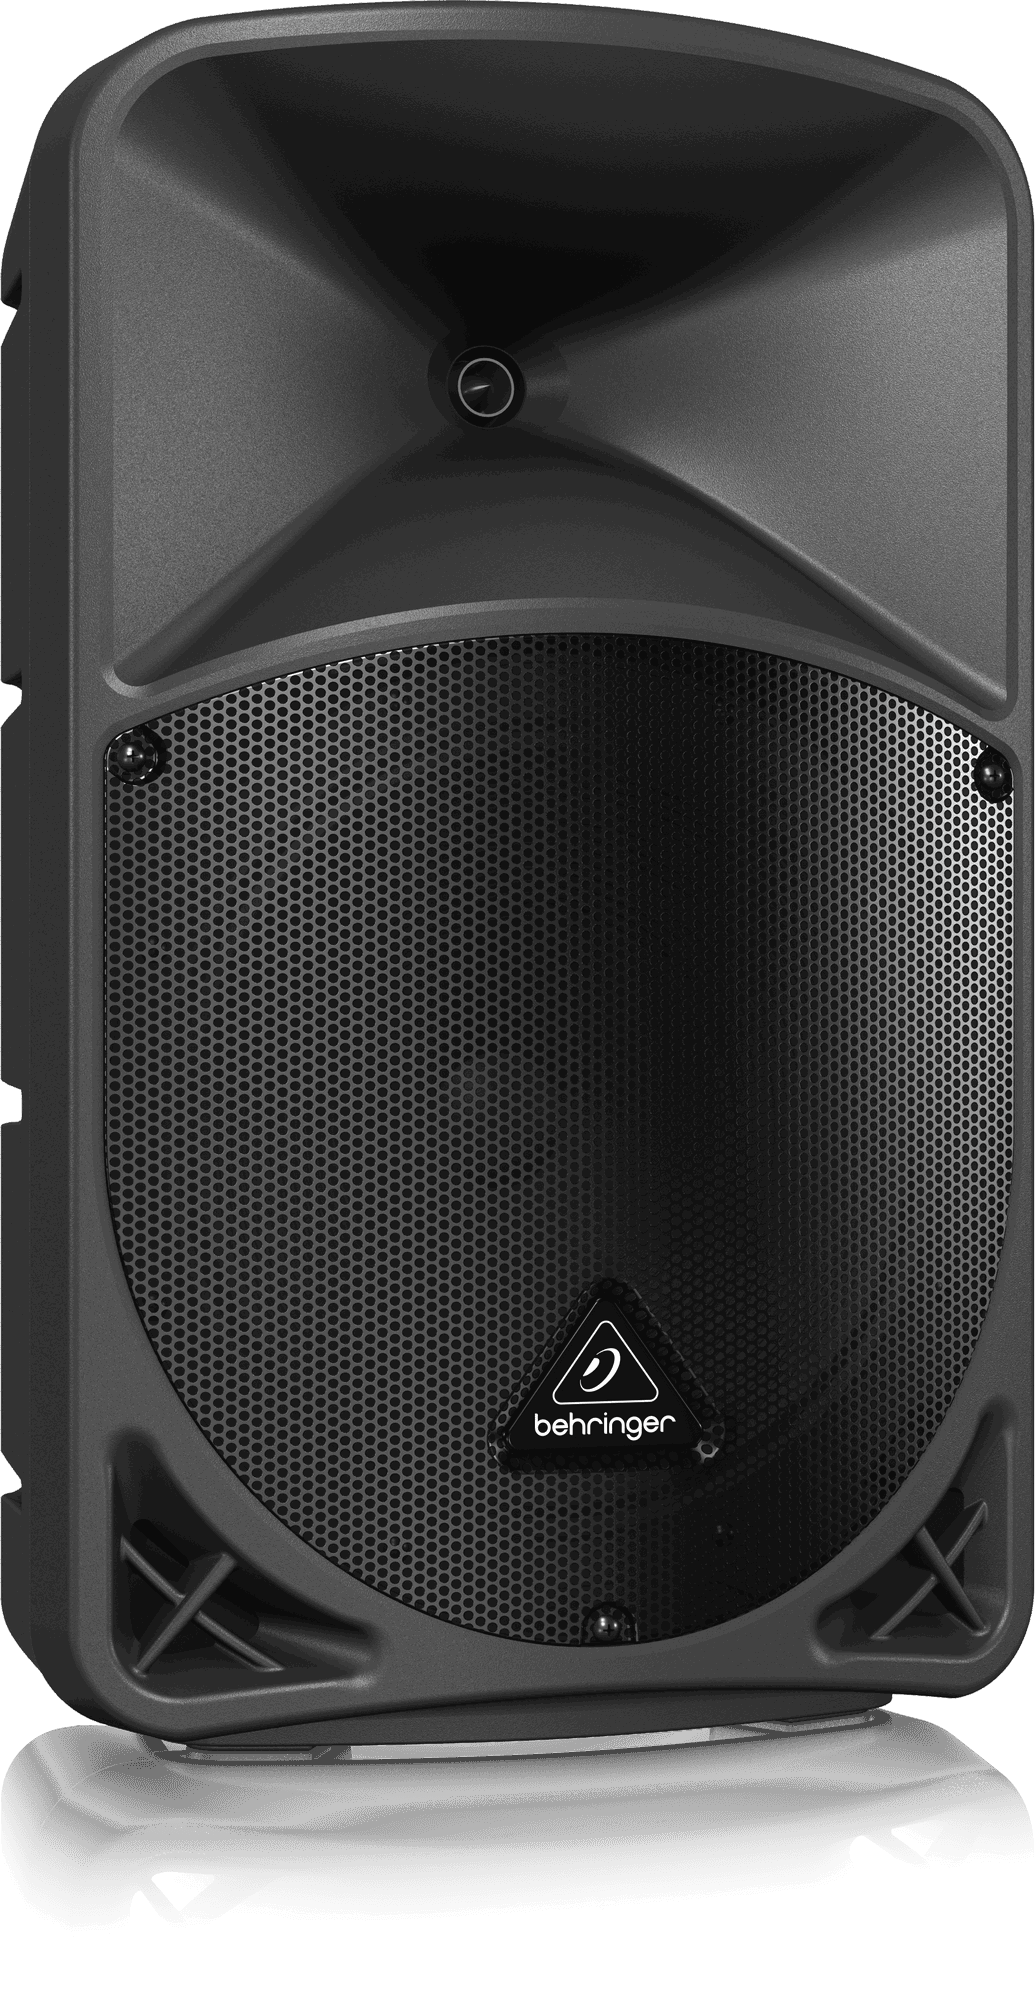 Behringer B12X 1000 Watt 2 Way 12" Powered Loudspeaker with Digital Mixer, Wireless Option, Remote Control via iOS*/Android* Mobile App and Bluetooth Audio Streaming | BEHRINGER , Zoso Music